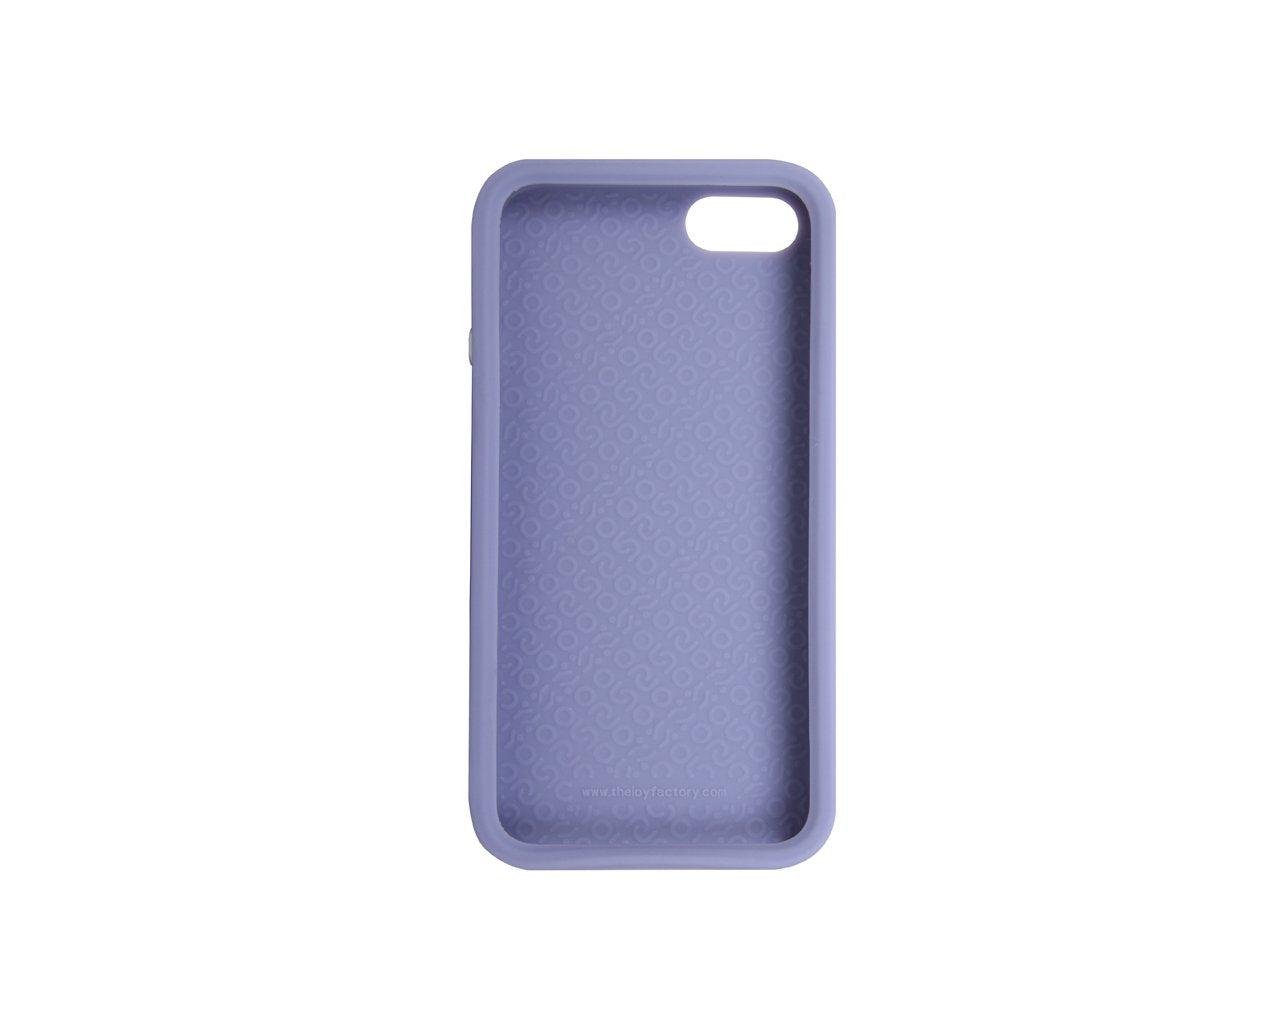 The Joy Factory Jugar Soft Silicone Case with Metal Frame for iPhone5/5S, CSD102 (Purple)